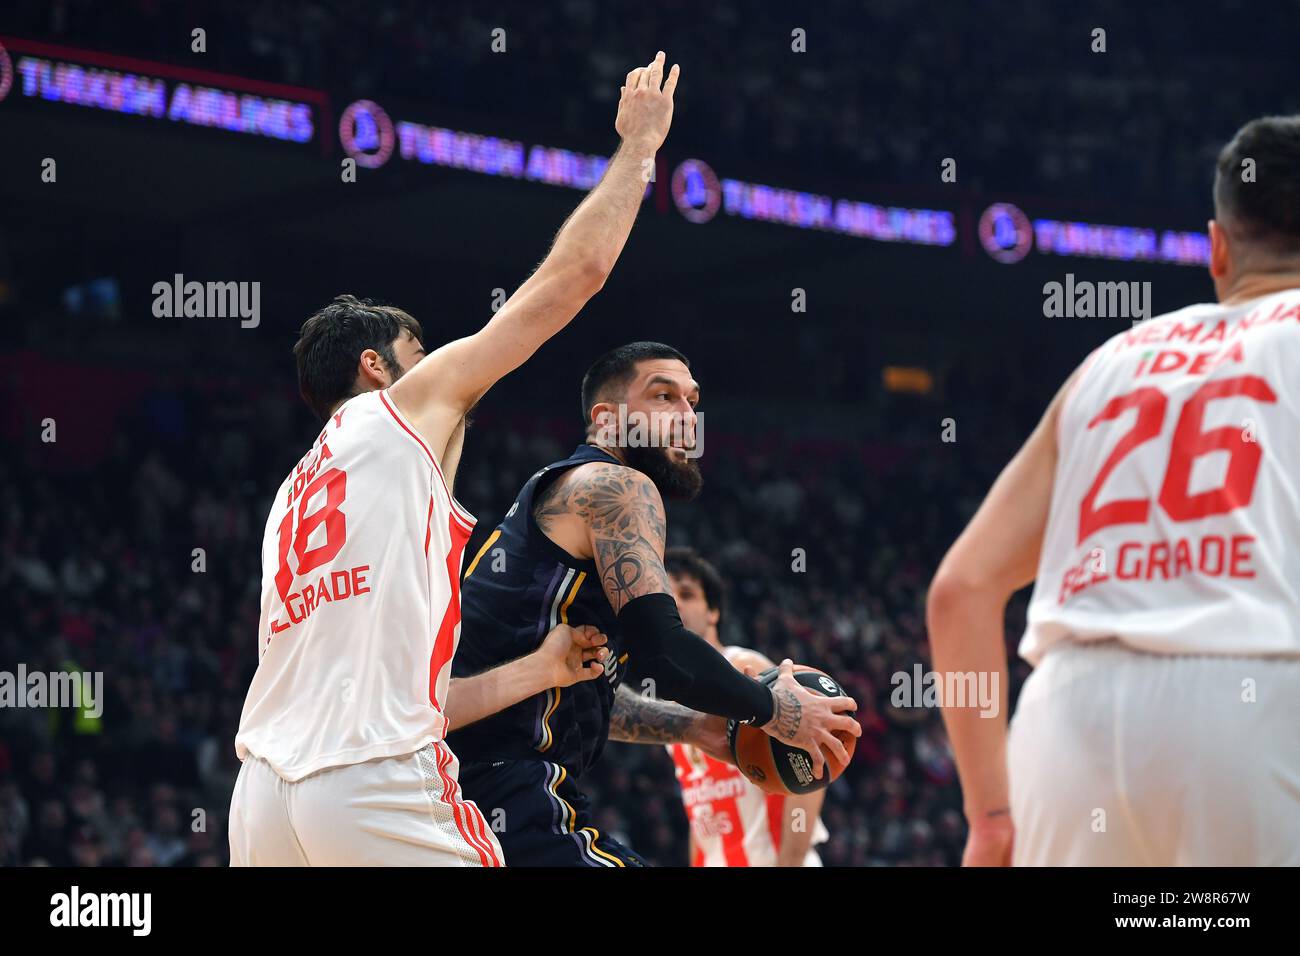 Belgrade, Serbia, 19 December, 2023. Vincent Poirier of Real Madrid in action during the 2023/2024 Turkish Airlines EuroLeague match between Crvena Zvezda Meridianbet Belgrade and Real Madrid at Aleksandar Nikolic Hall in Belgrade, Serbia. December 19, 2023. Credit: Nikola Krstic/Alamy Stock Photo